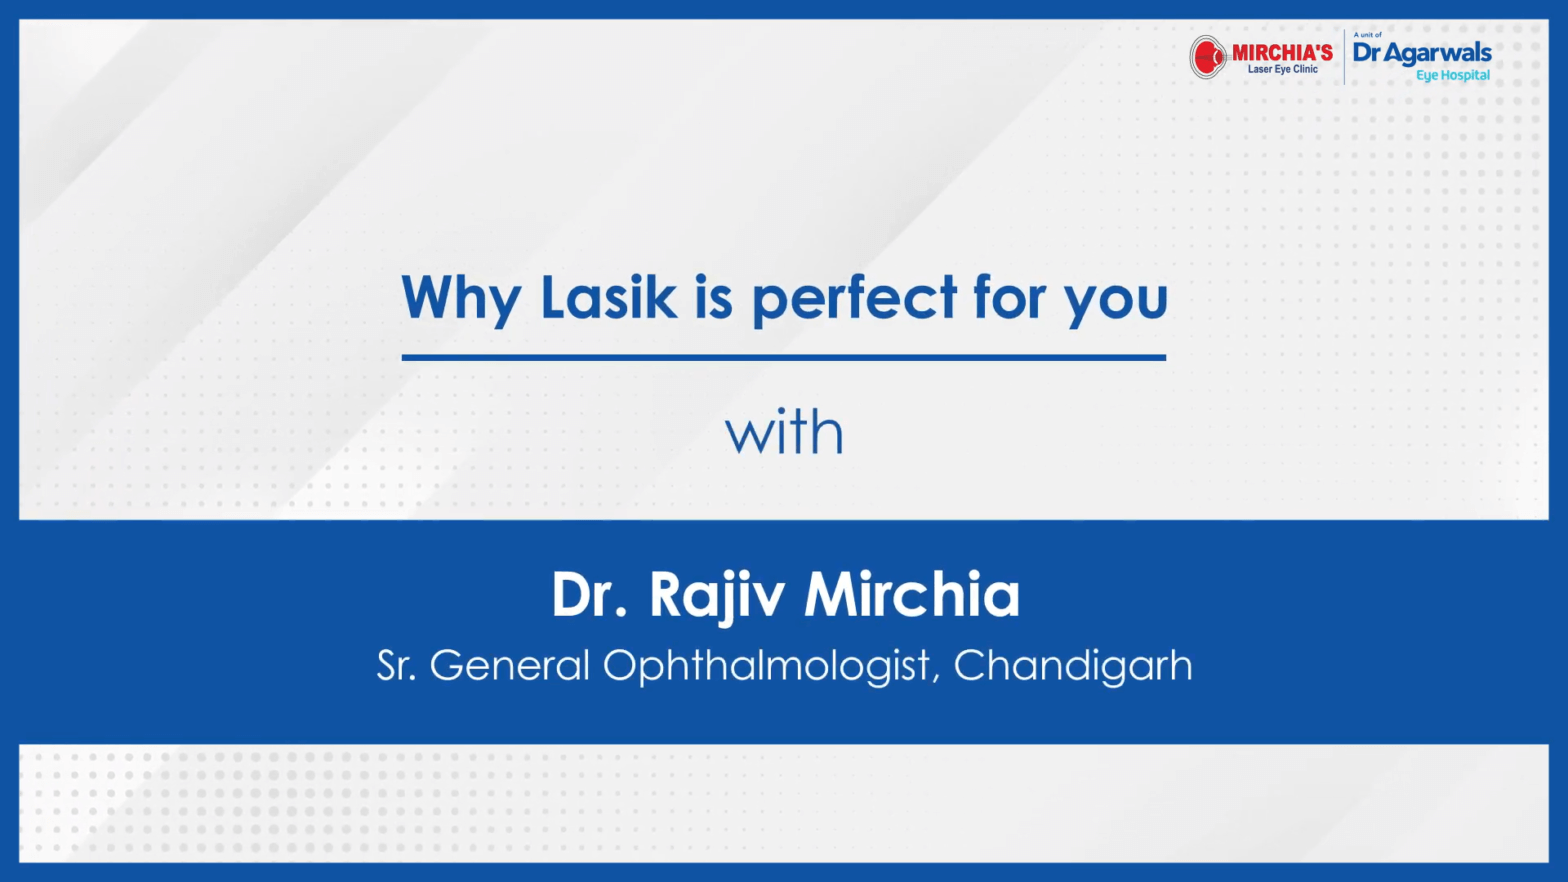 Why LASIK is perfect for you?